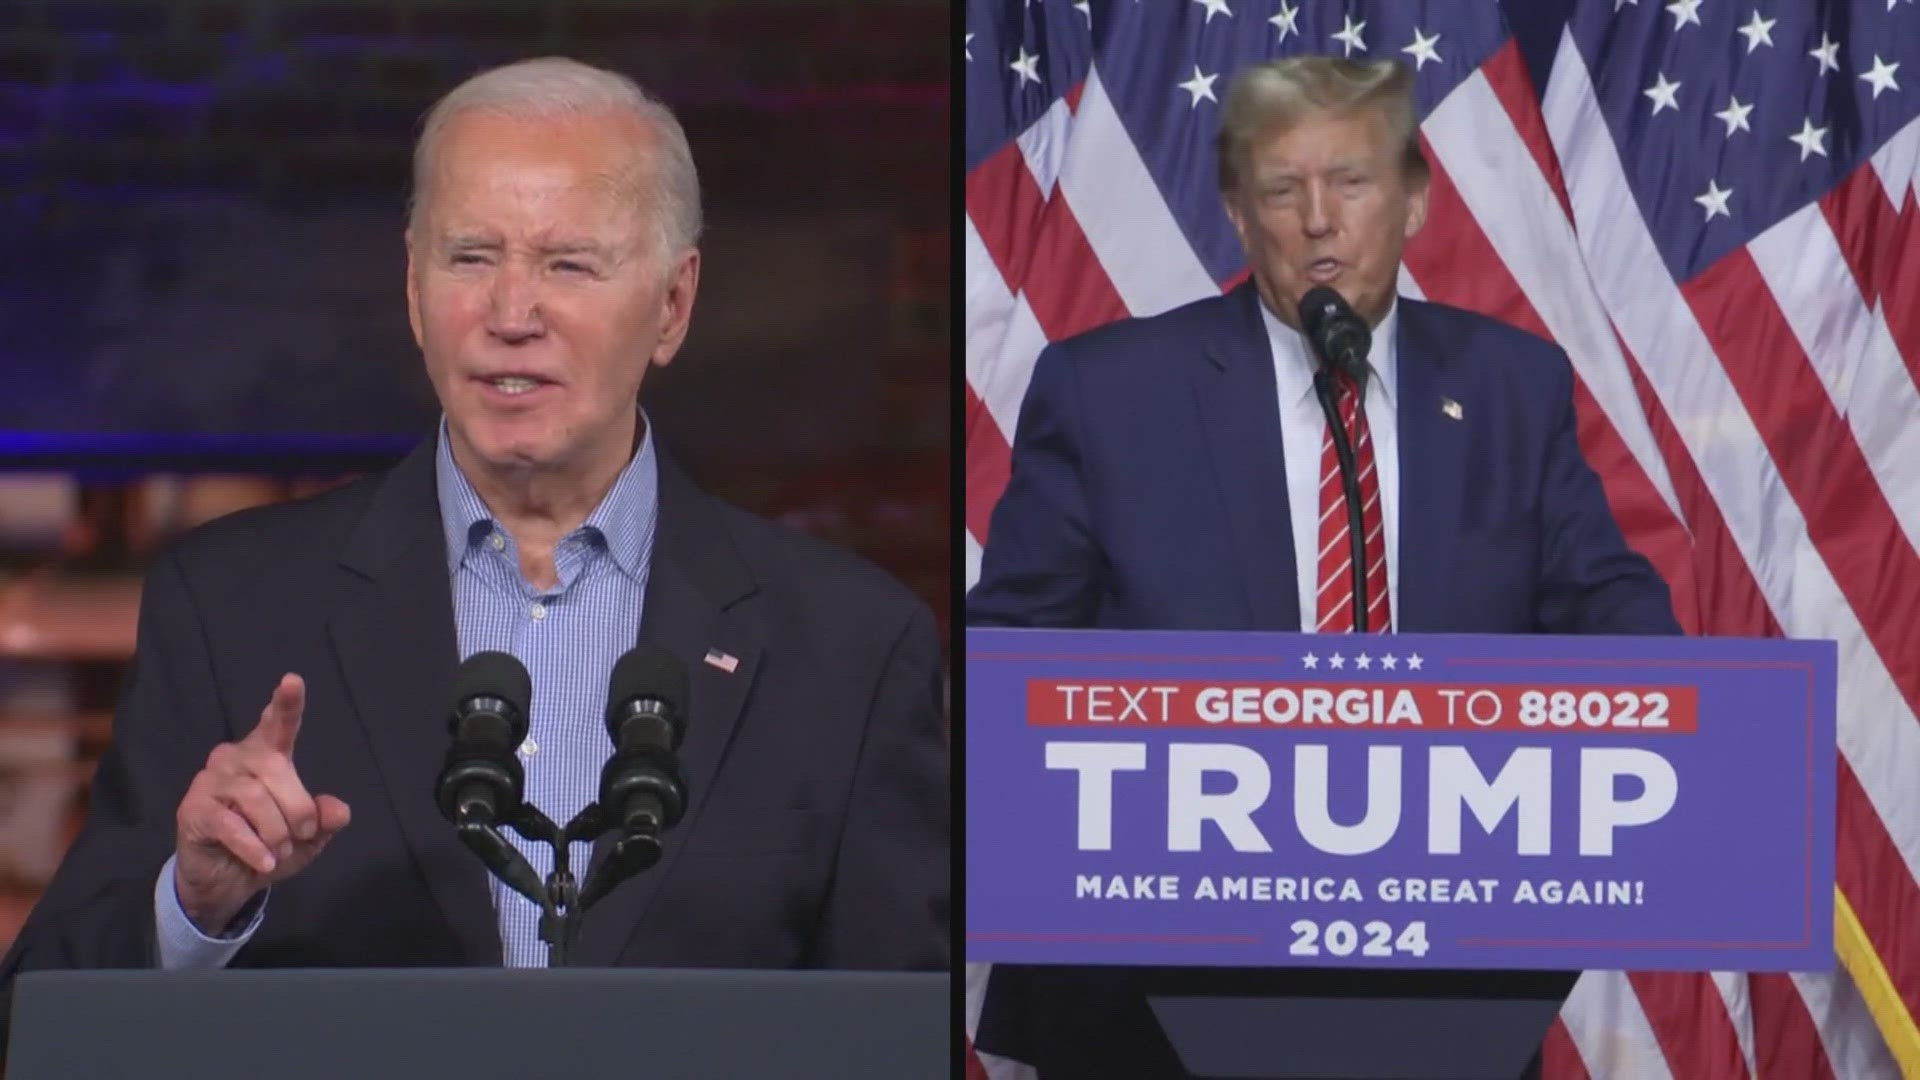 Donald Trump clinched the Republican party's nominee for the 2024 presidential election, and Joe Biden will be the Democratic nominee.